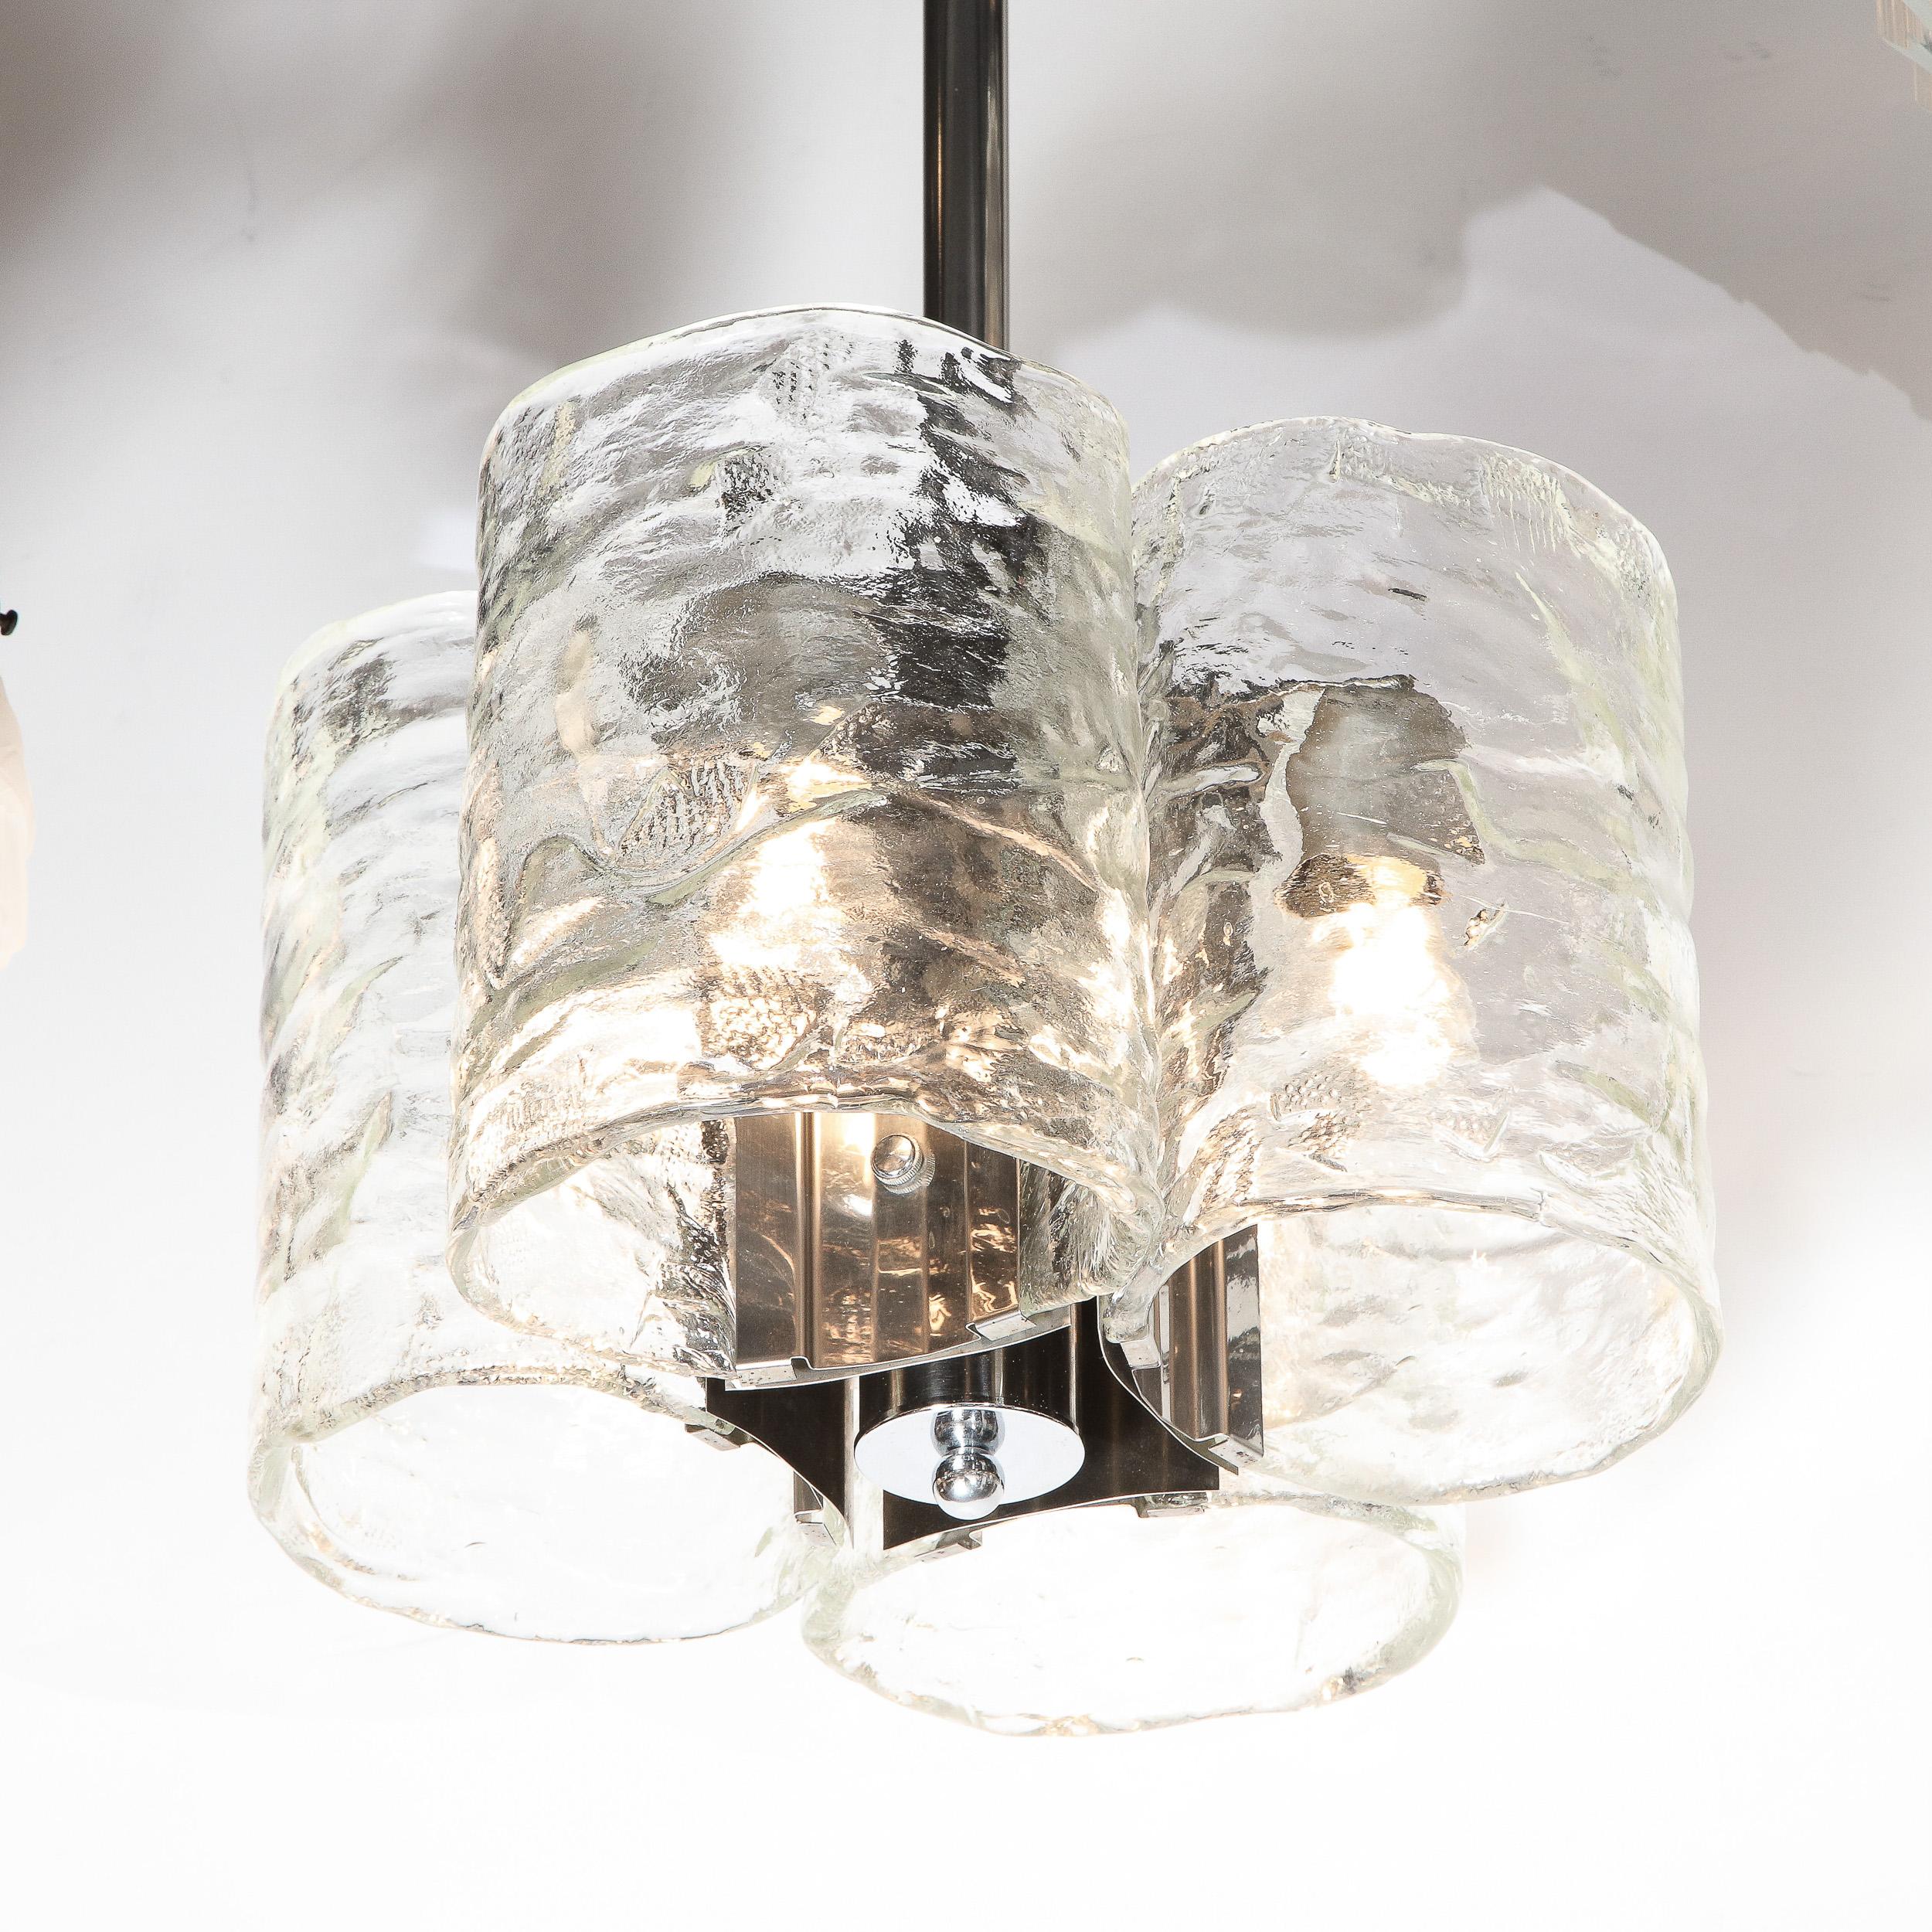 This handsome Mid-Century Modern chandelier was realized by the celebrated Italian design firm, Mazzega, circa 1970. It features four oblong cylindrical forms in translucent smoked Murano glass with a subtle organic texture affixed to a cylindrical